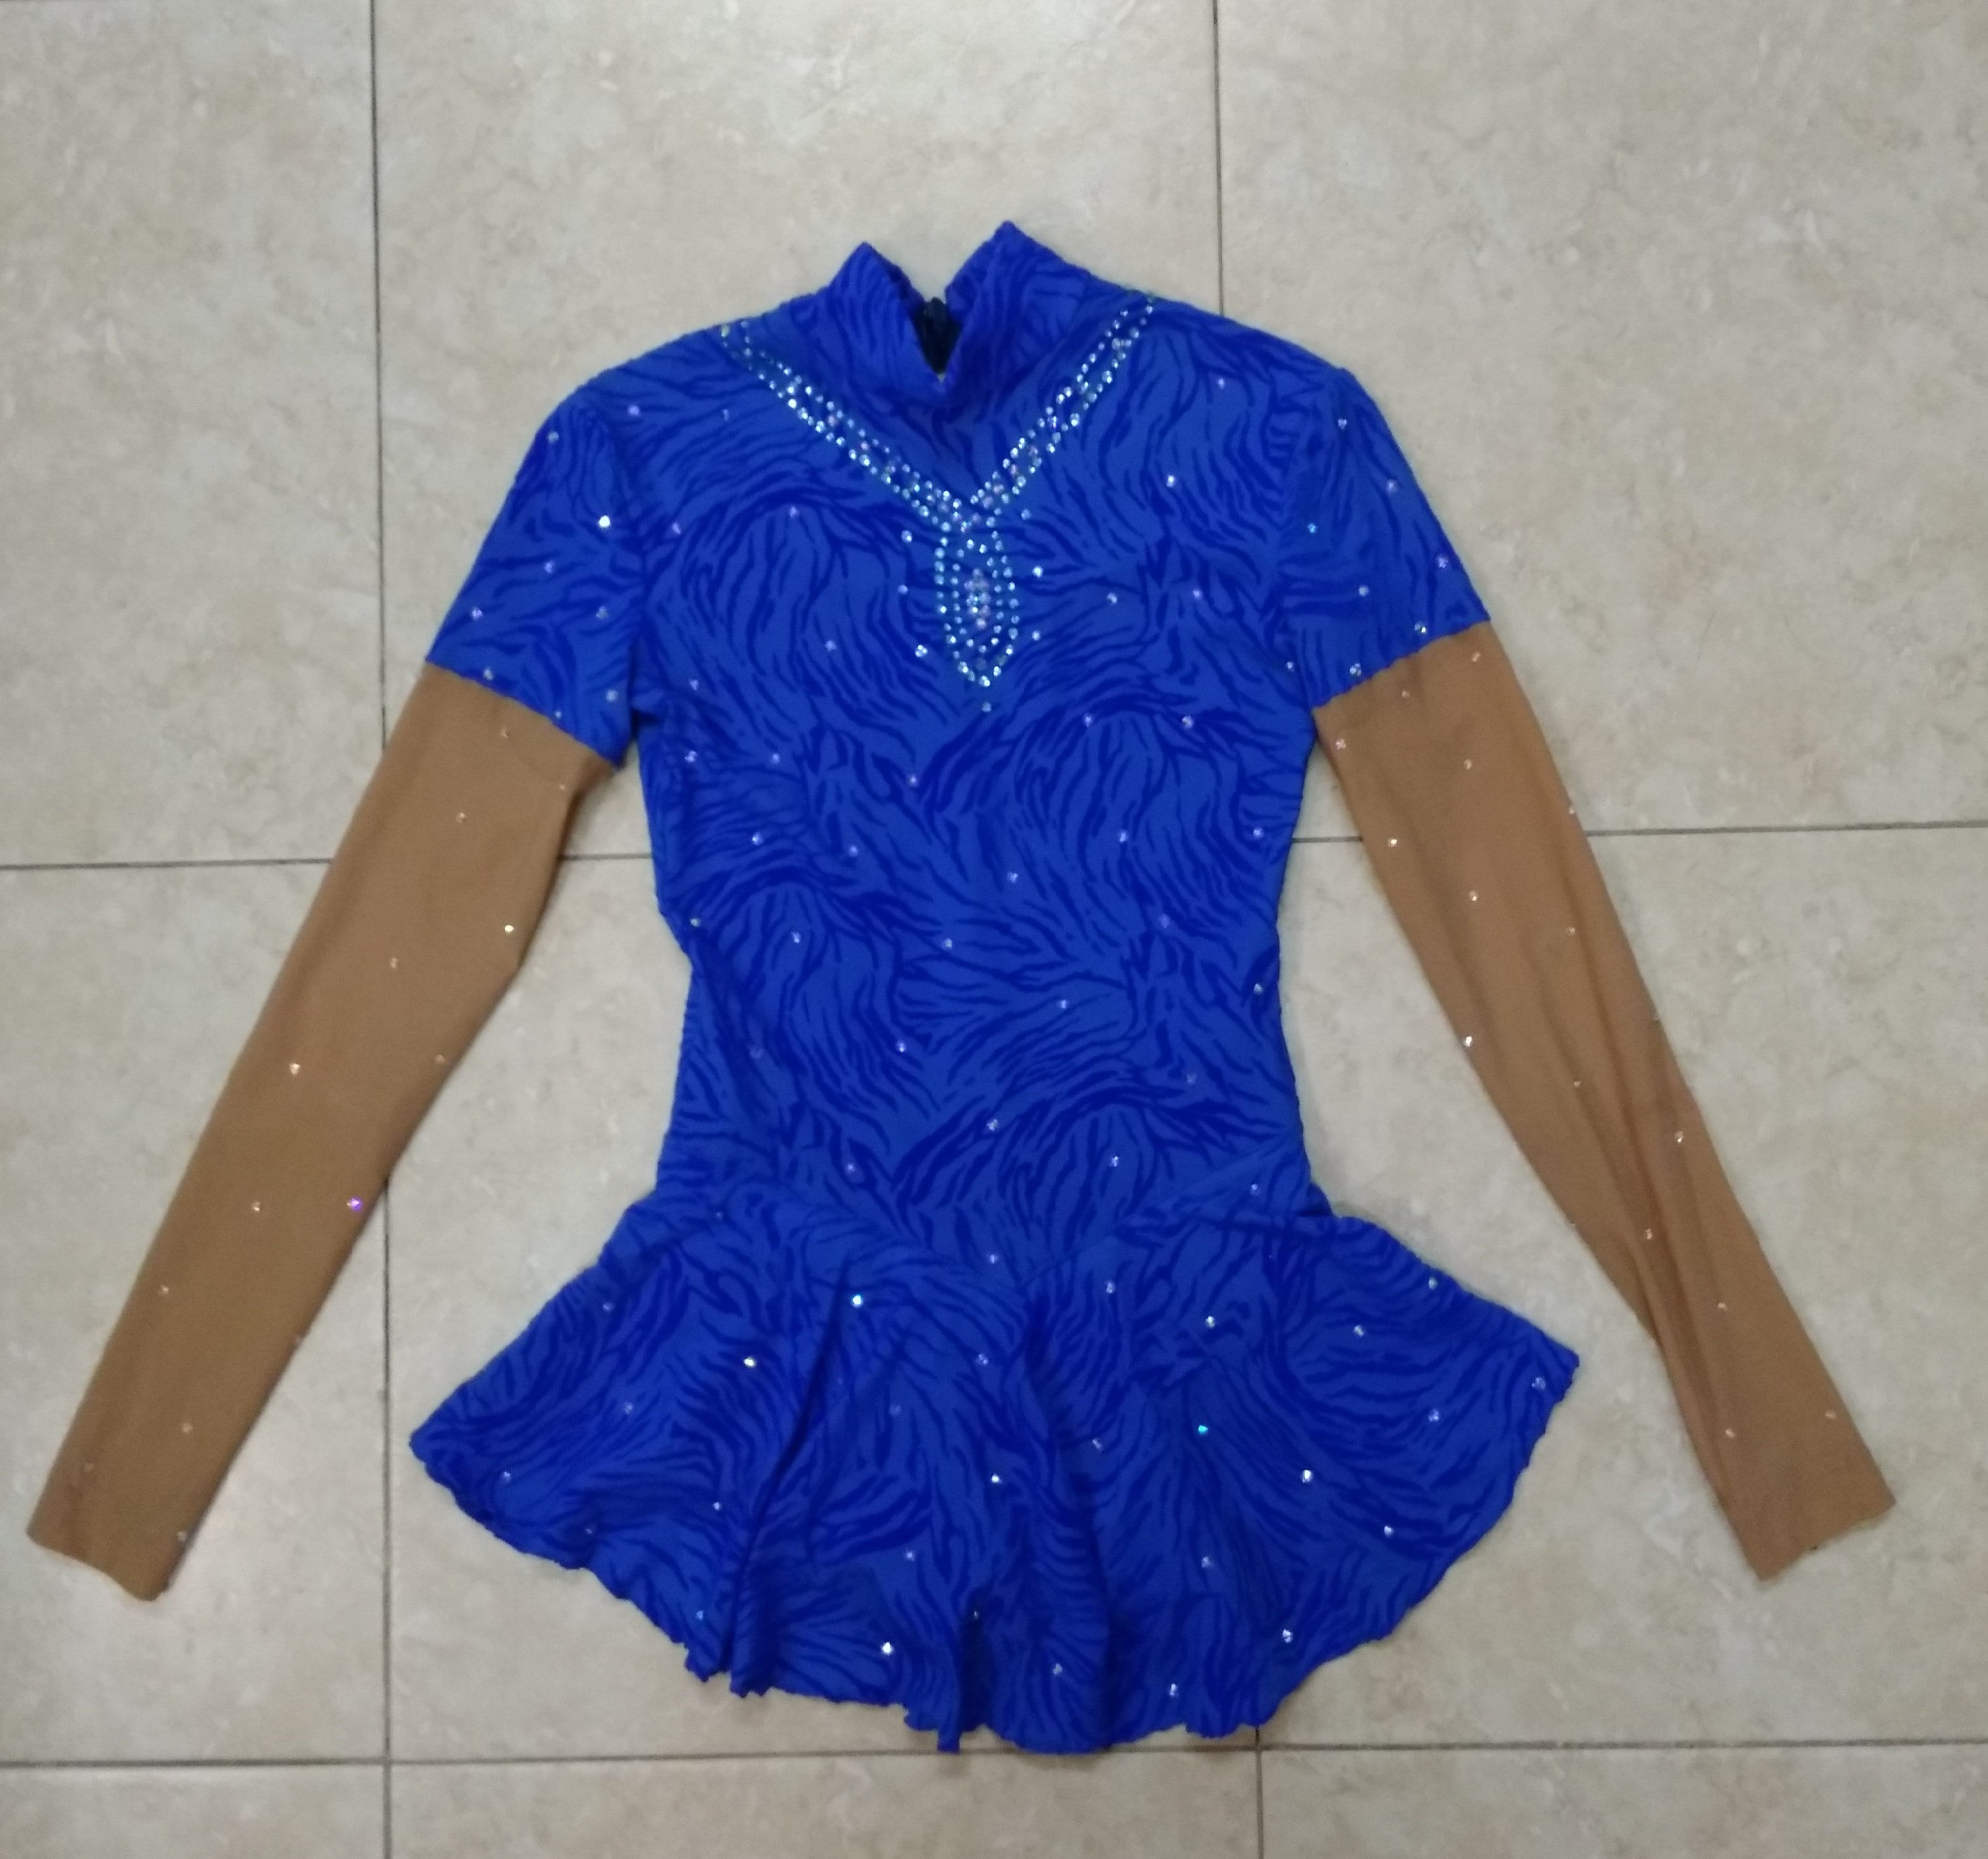 Robe patinage artistique #patin #patinage artistique #robe #competition